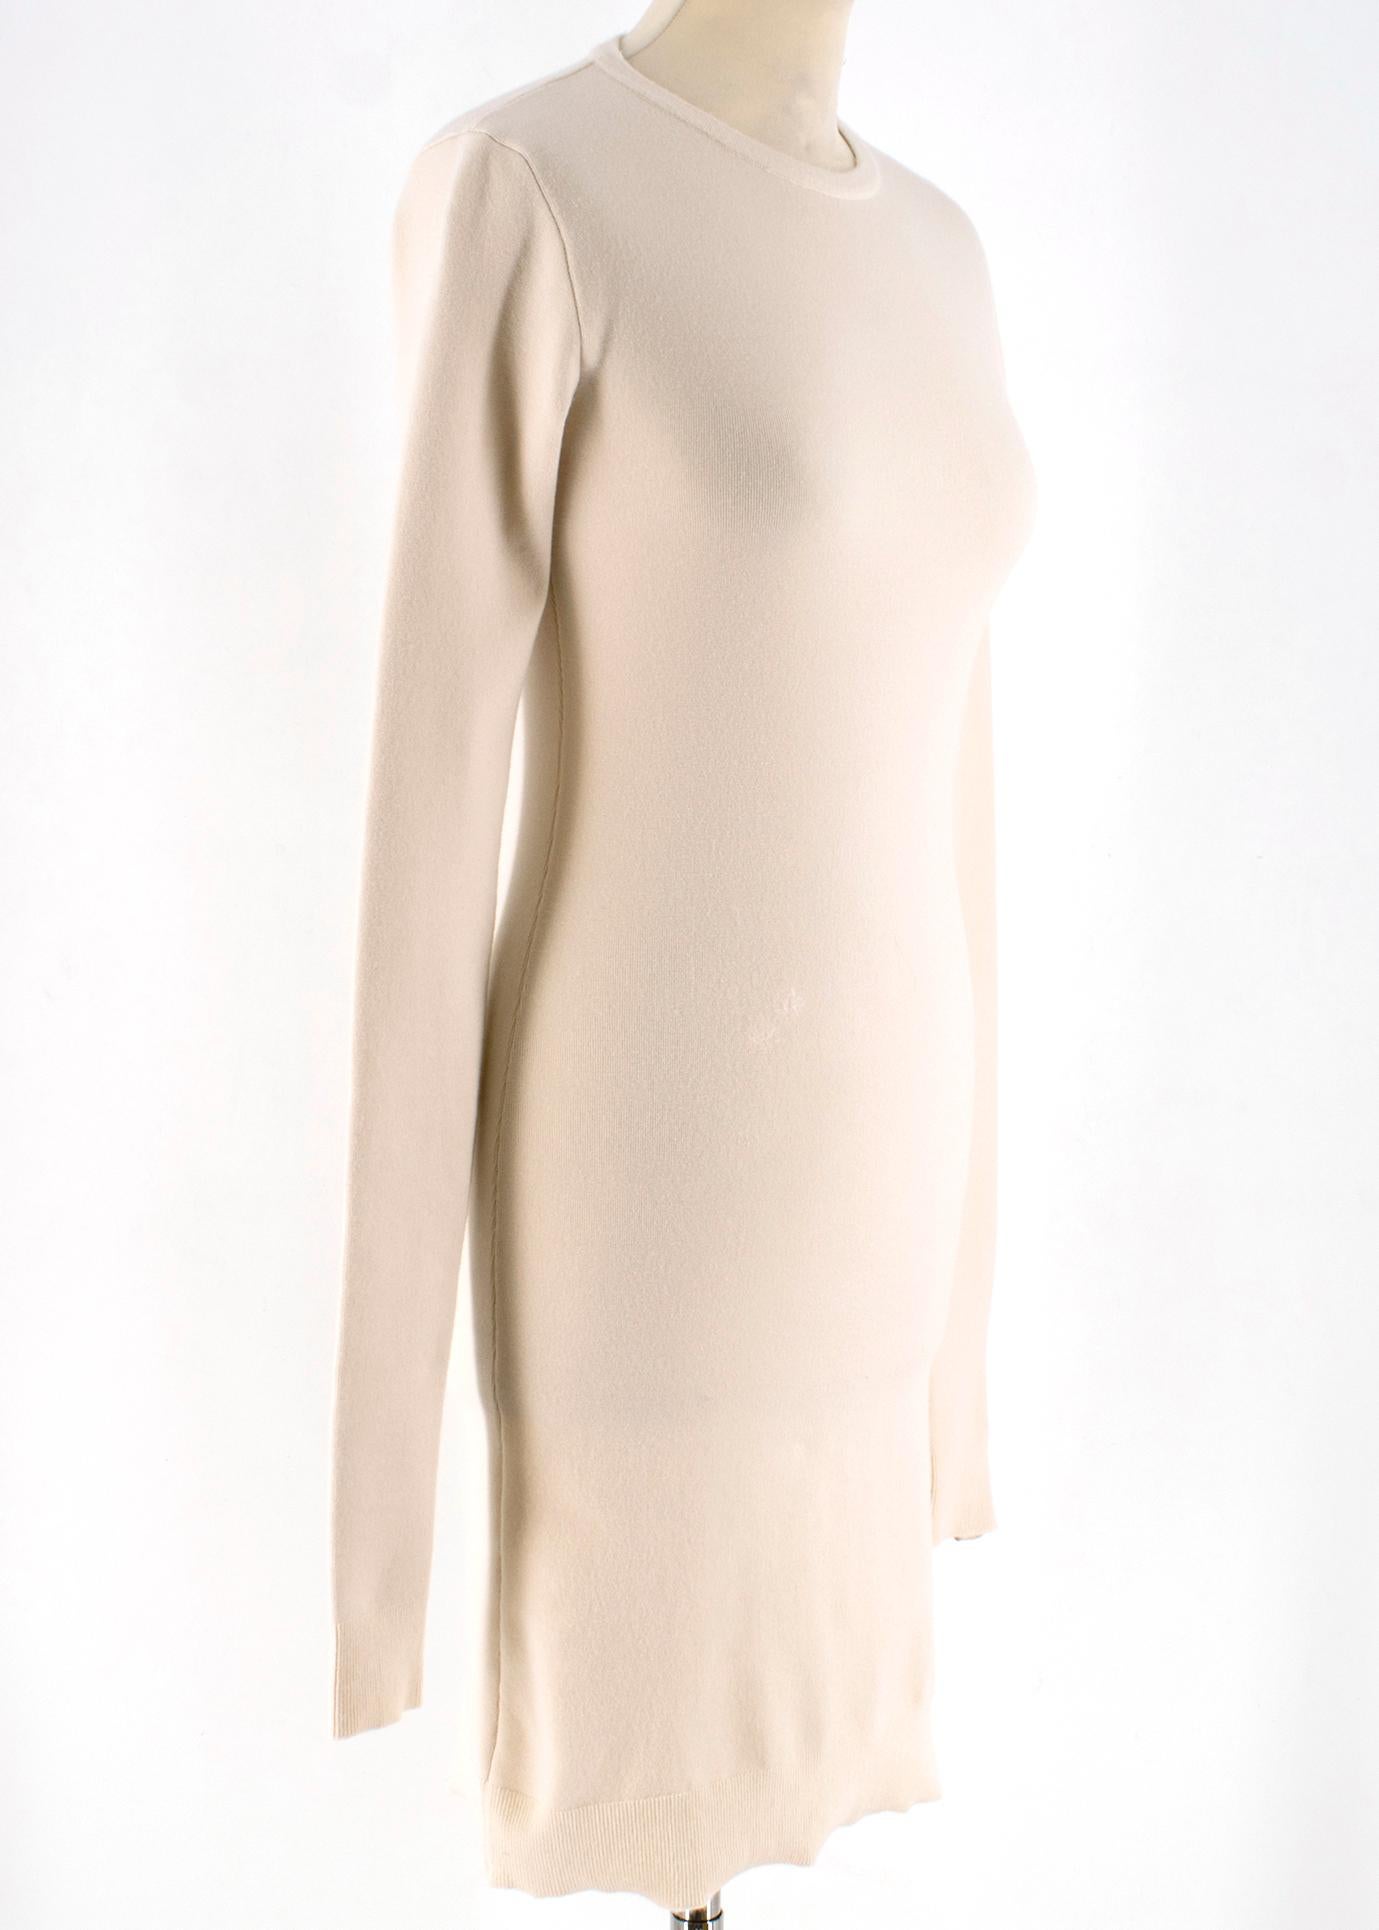 Body-skimming silhouette of this cream Bottega Veneta dress makes it a versatile piece that can be worn alone or used as a trans-seasonal building block. With ribbed edges and finished with a white Intrecciato leather tab at one cuff for a unique